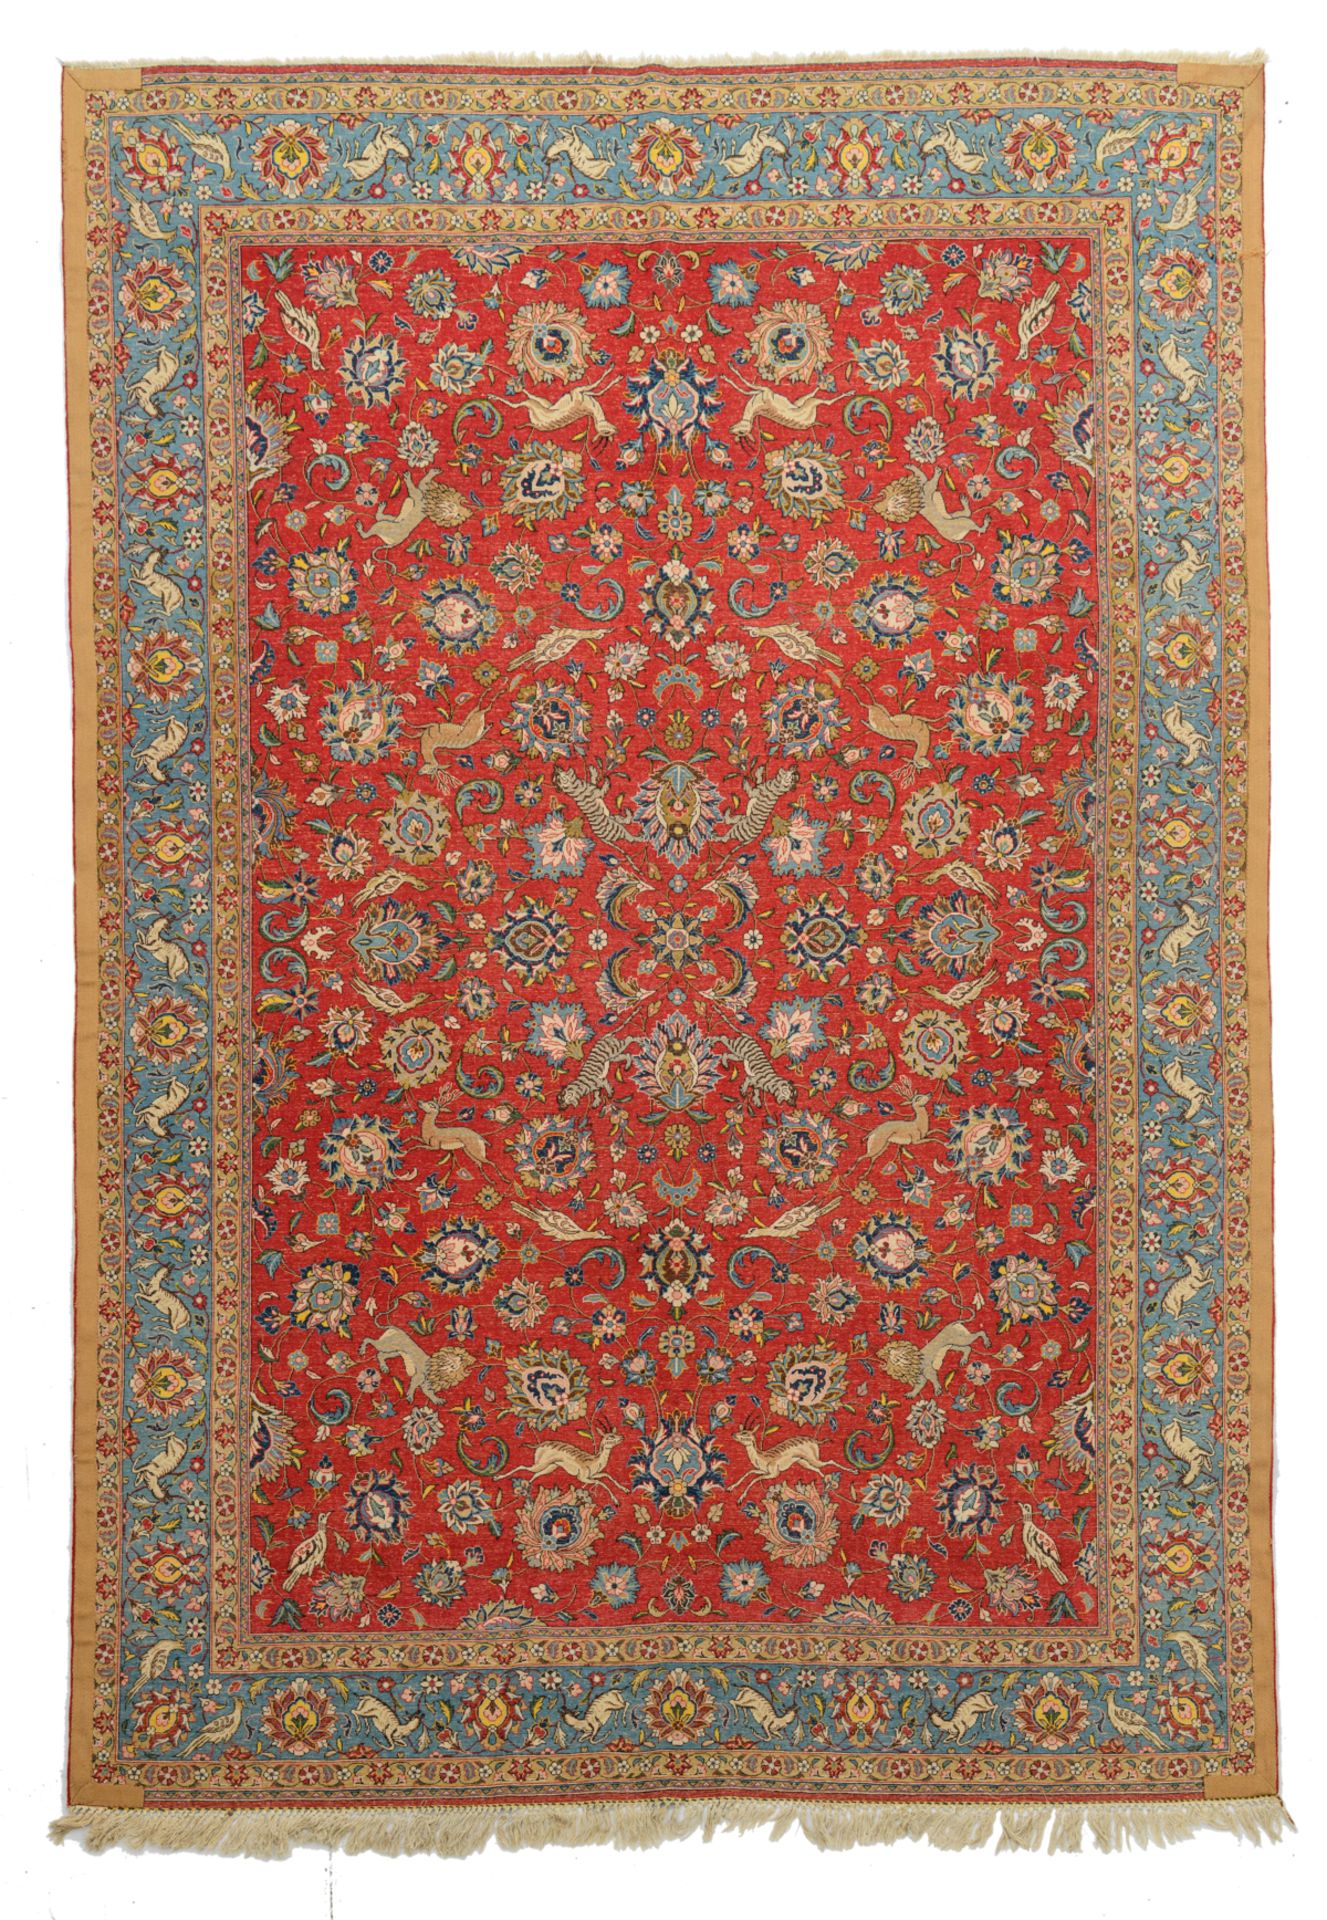 An Oriental woollen rug, decorated with hunting lions, deer and birds surrounded by flowers, 234 x 3 - Bild 2 aus 5